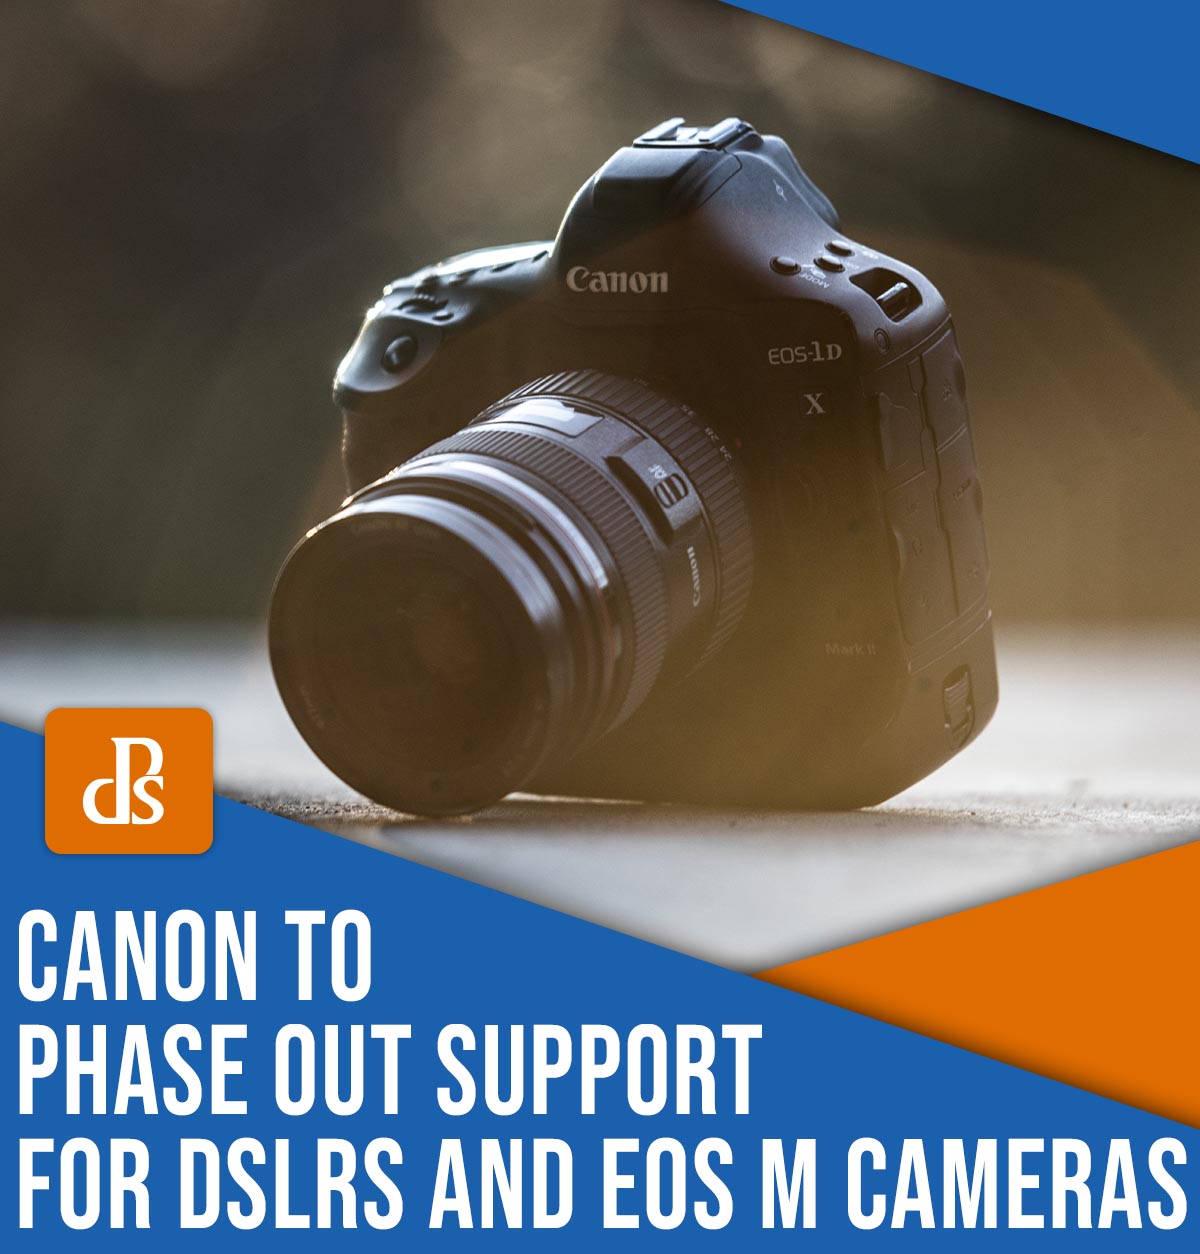 Canon to phase out support for DSLRs and EOS M cameras